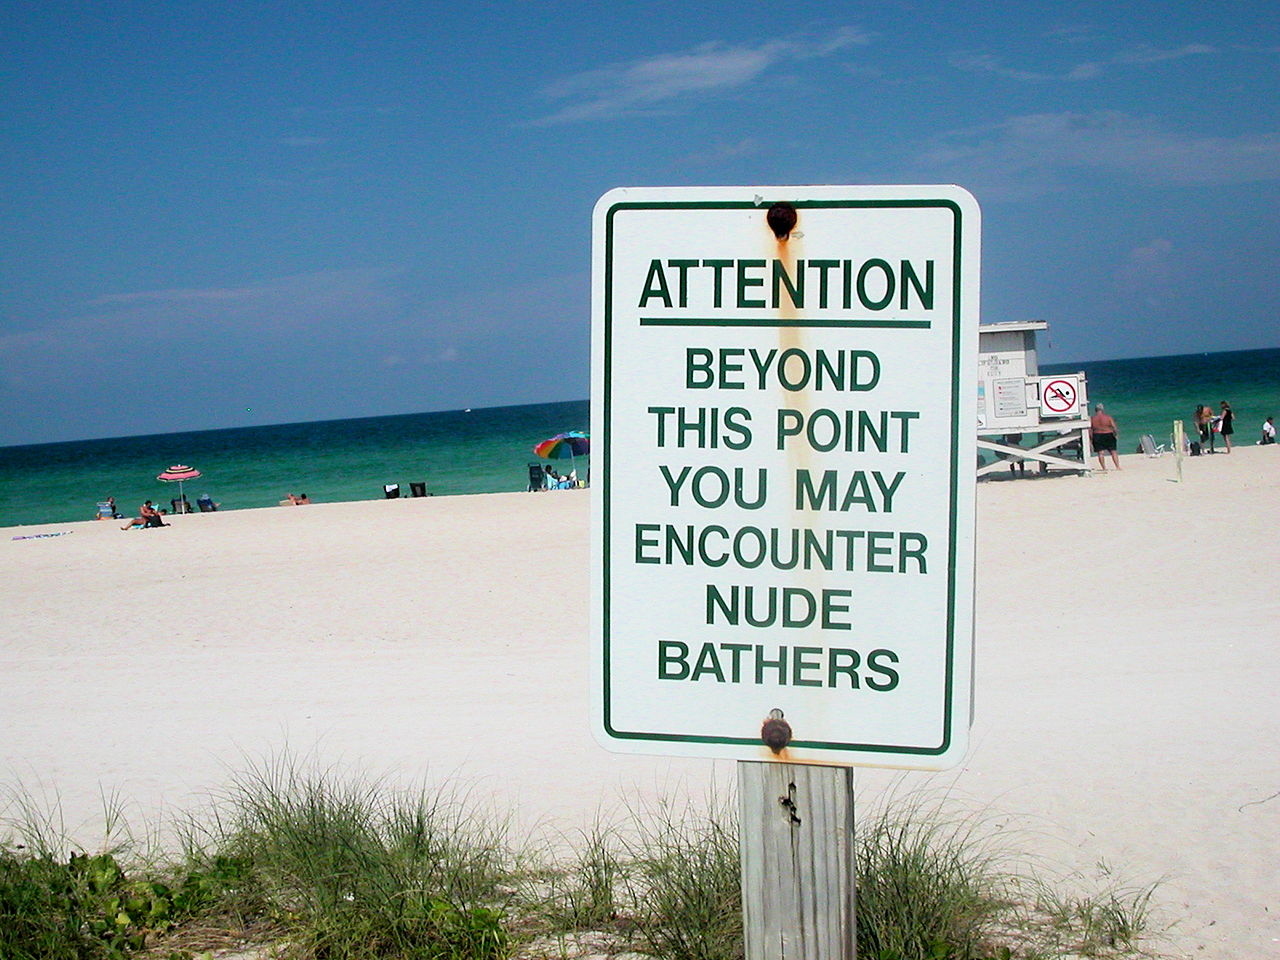 Should Public Nudity Be Legalised?